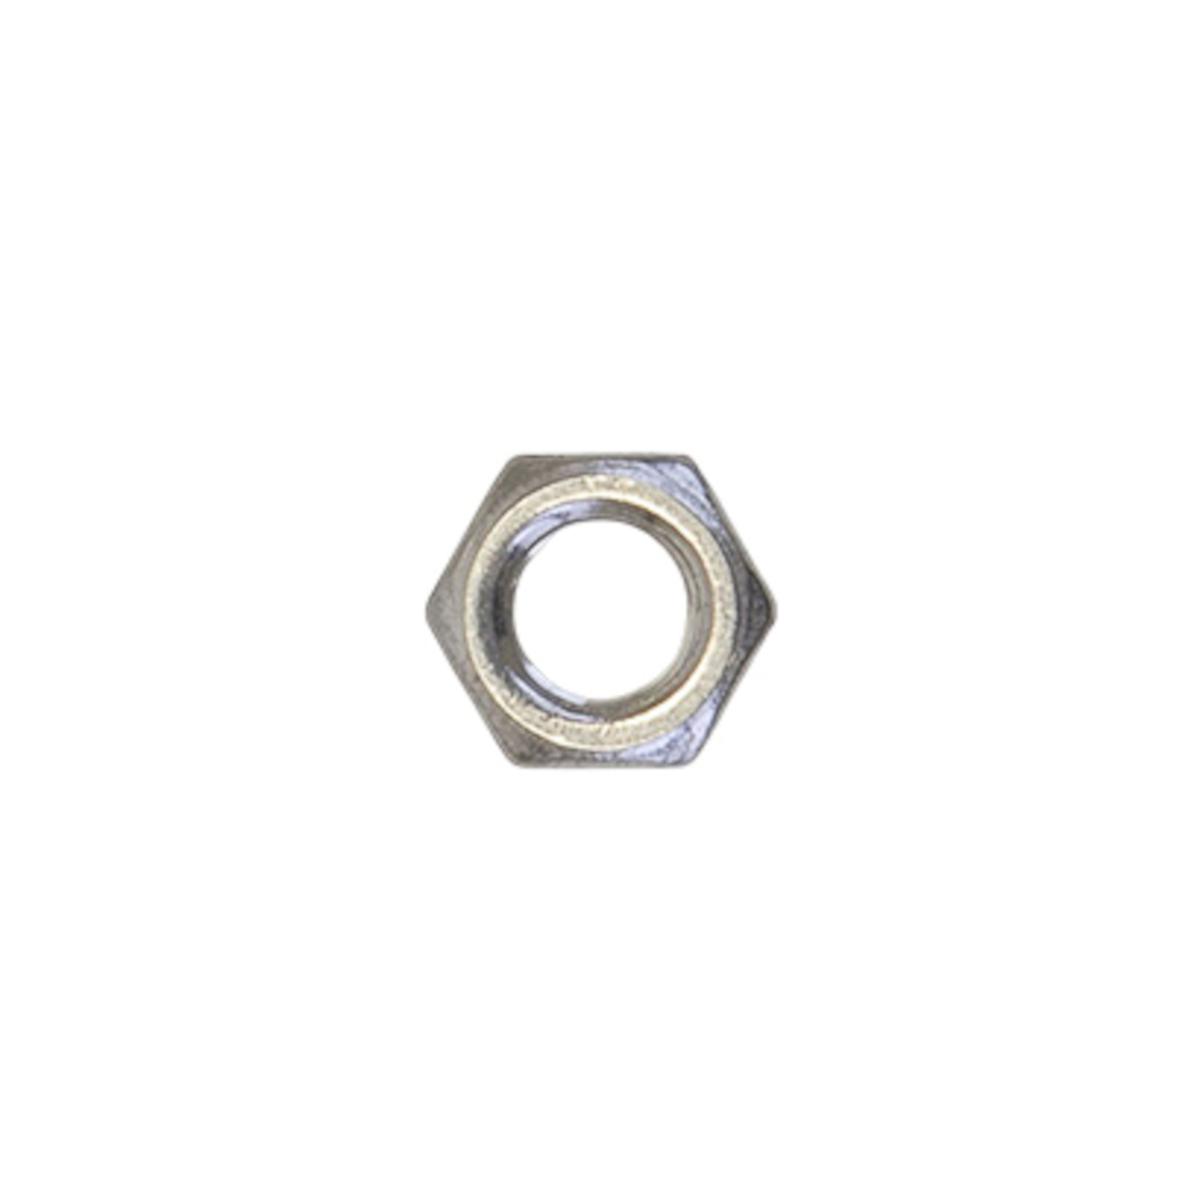 MadJax XSeries Storm M5 Hex Stainless Steel E-Nut